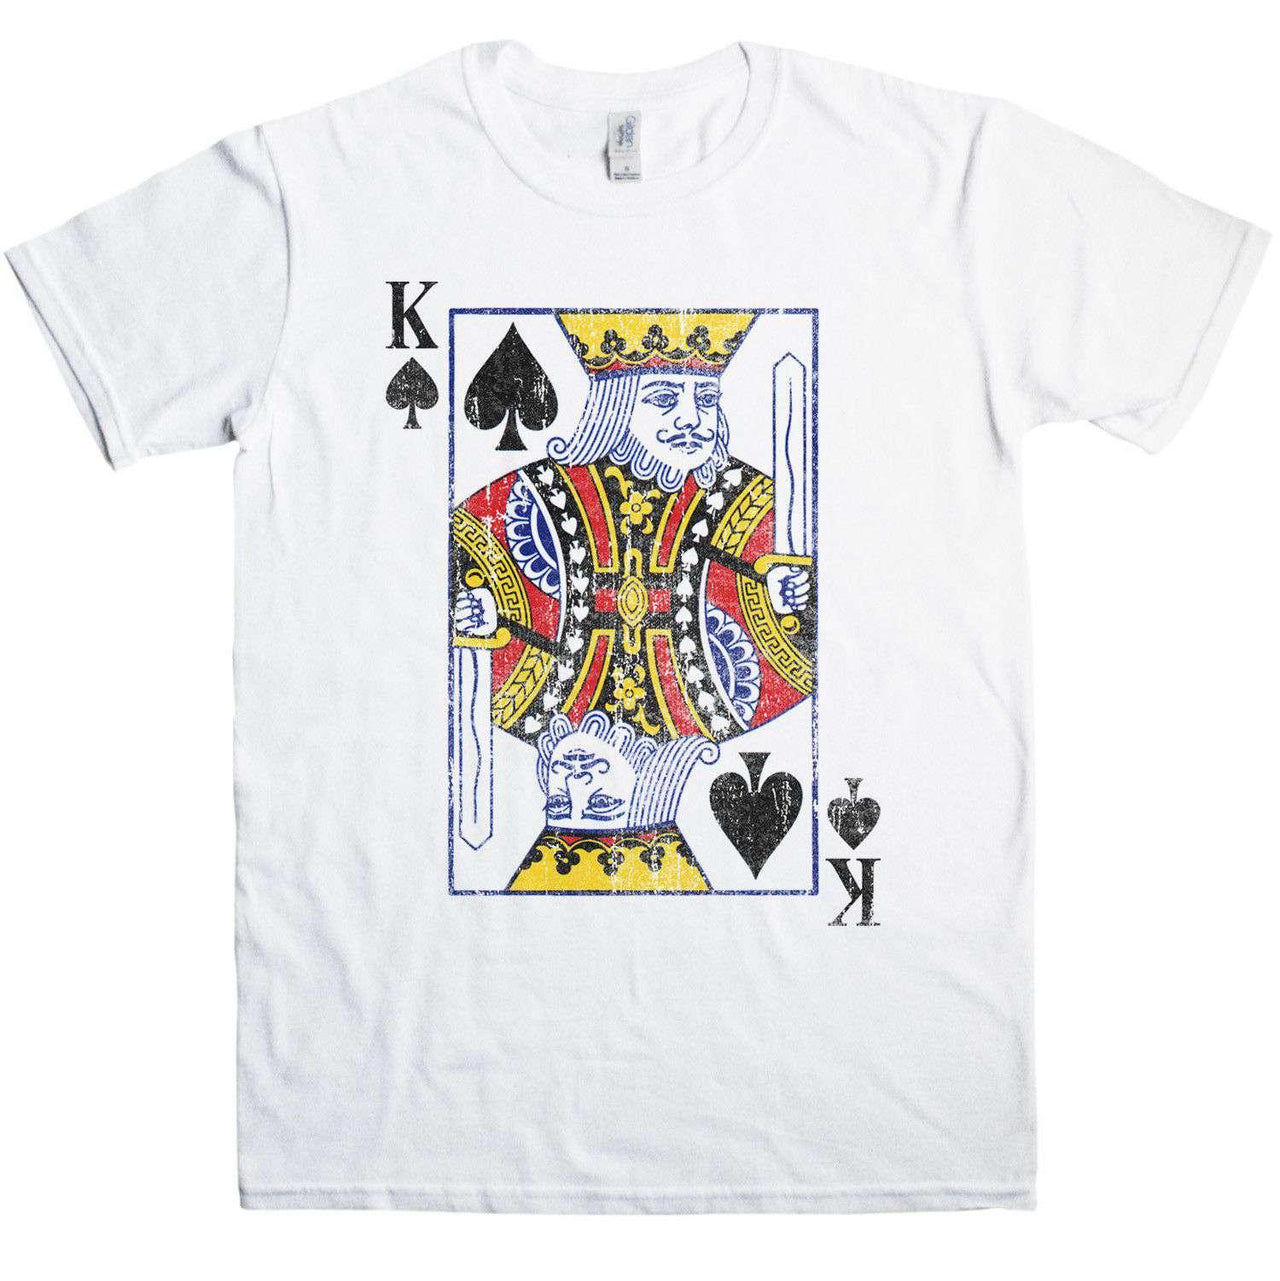 Distressed King Of Spades T-Shirt For Men 8Ball